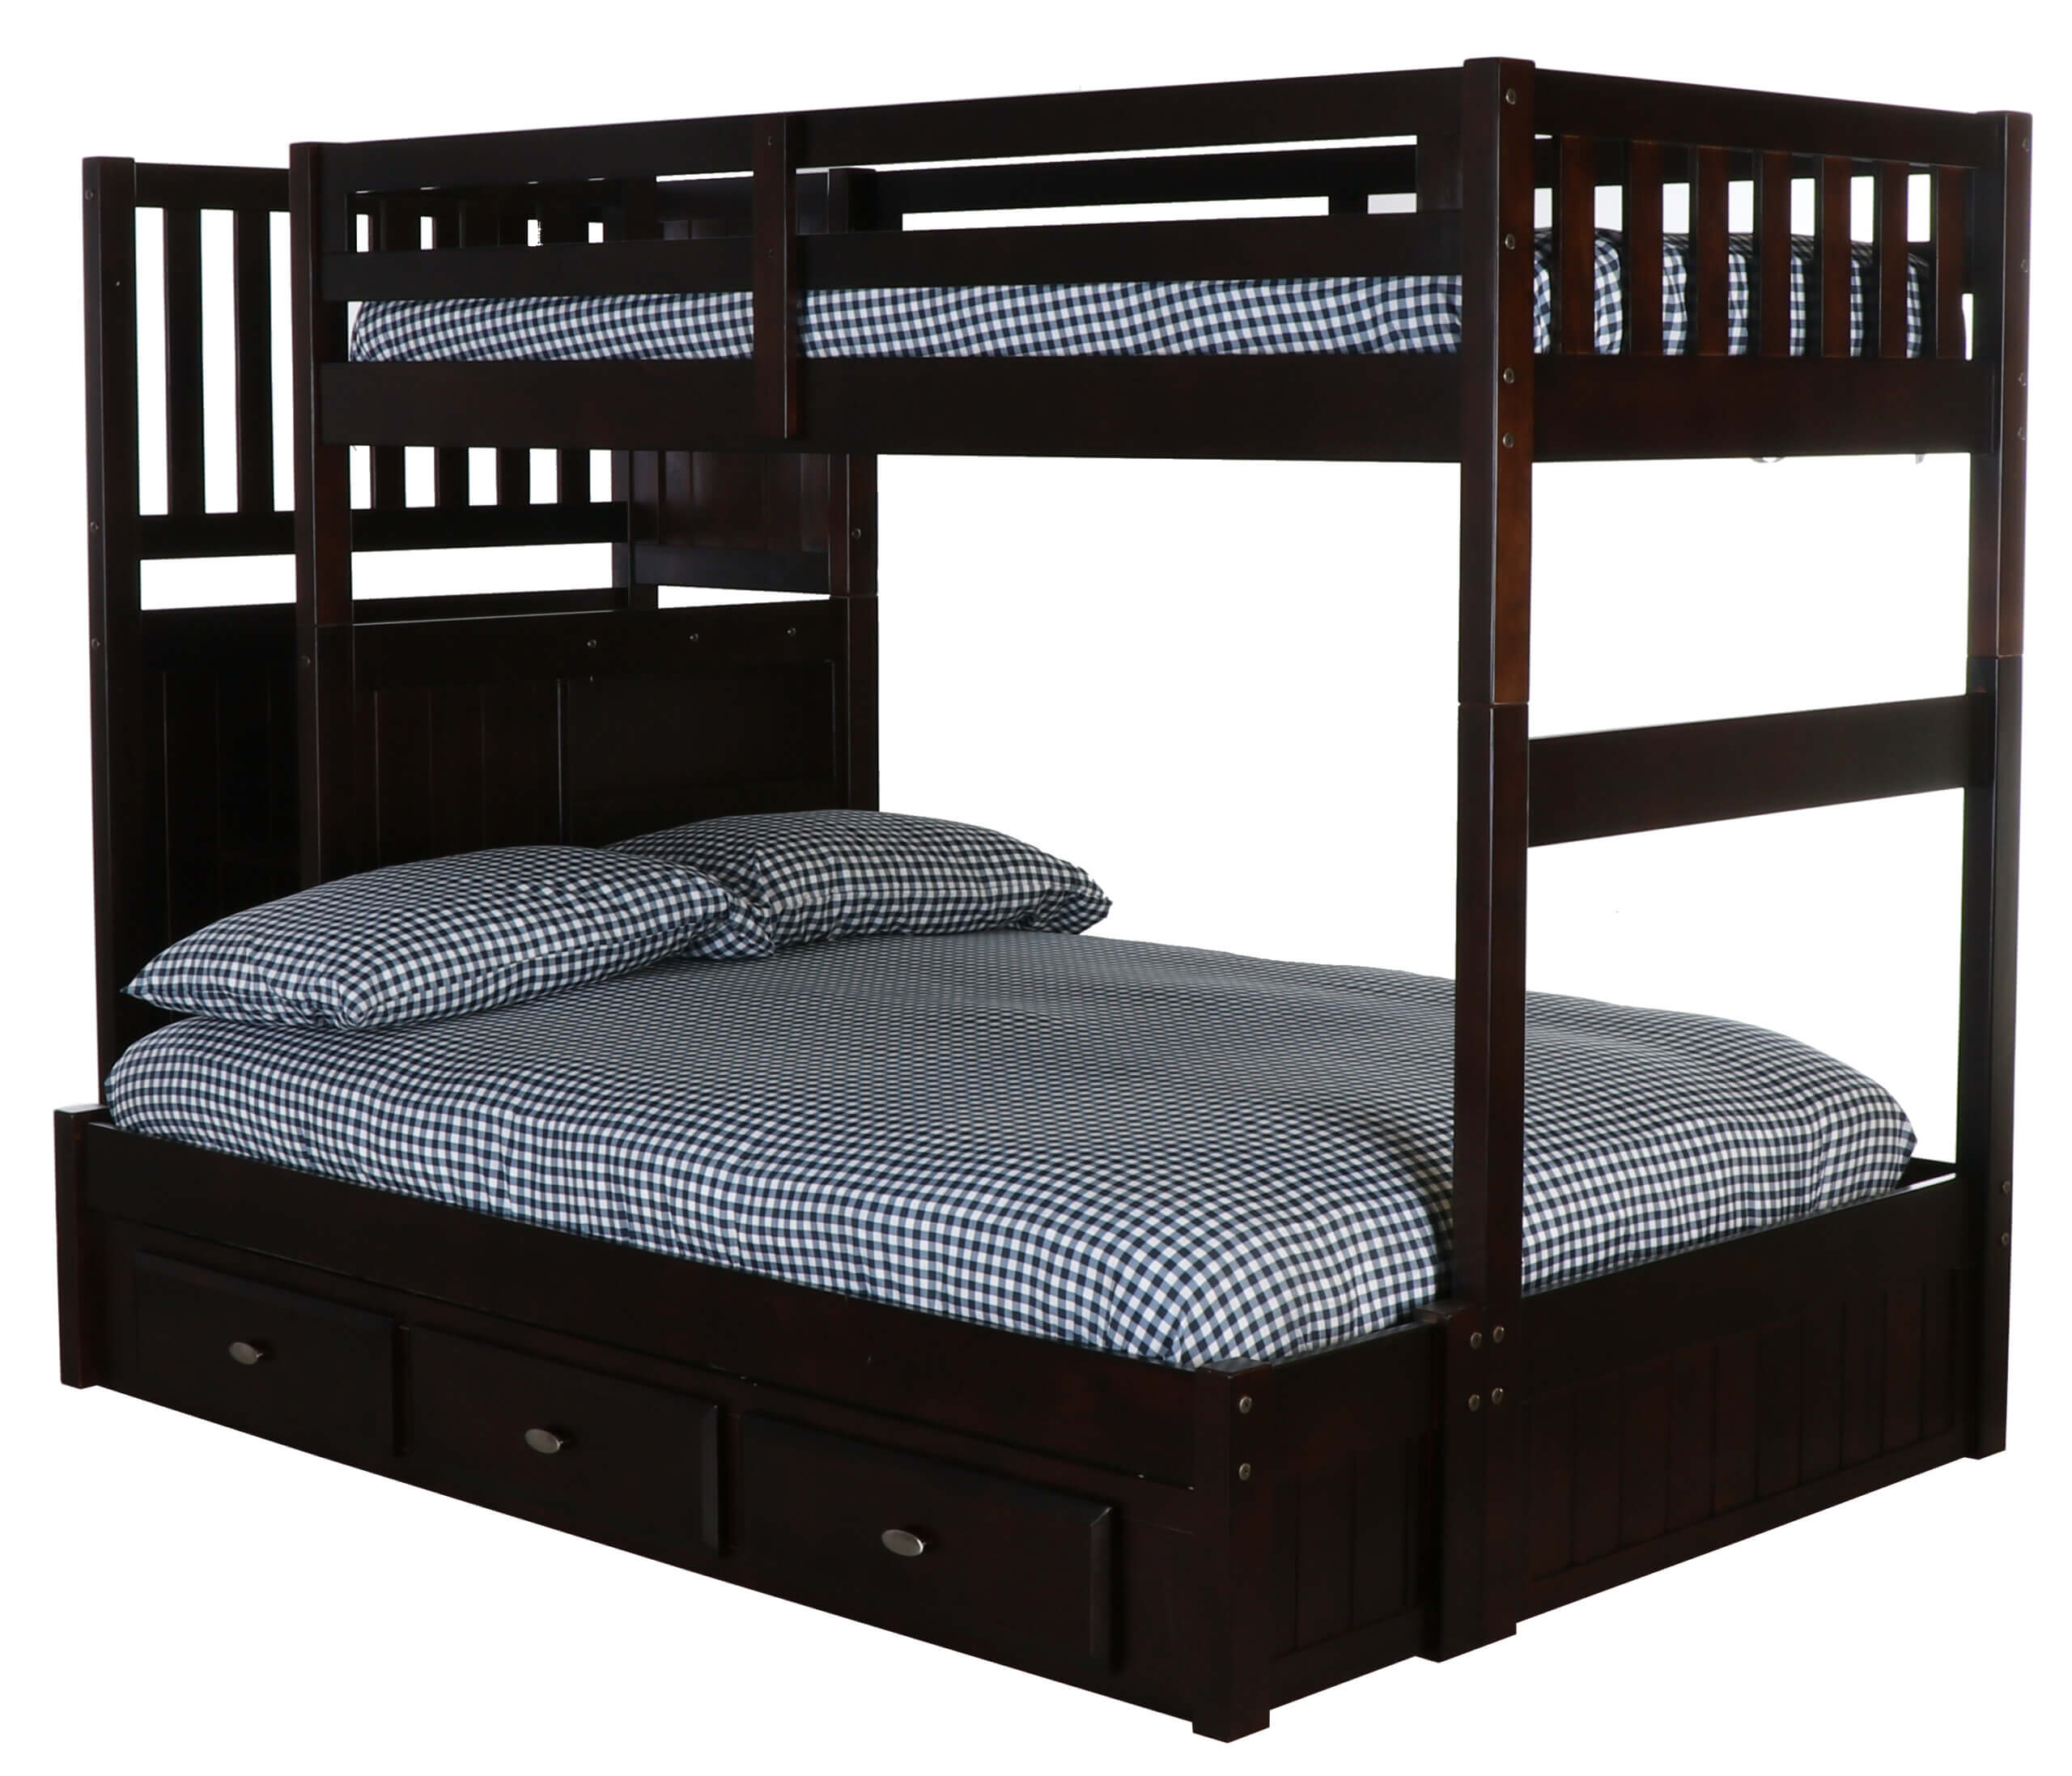 Espresso Staircase Bunk Bed All, Espresso Bunk Bed With Stairs